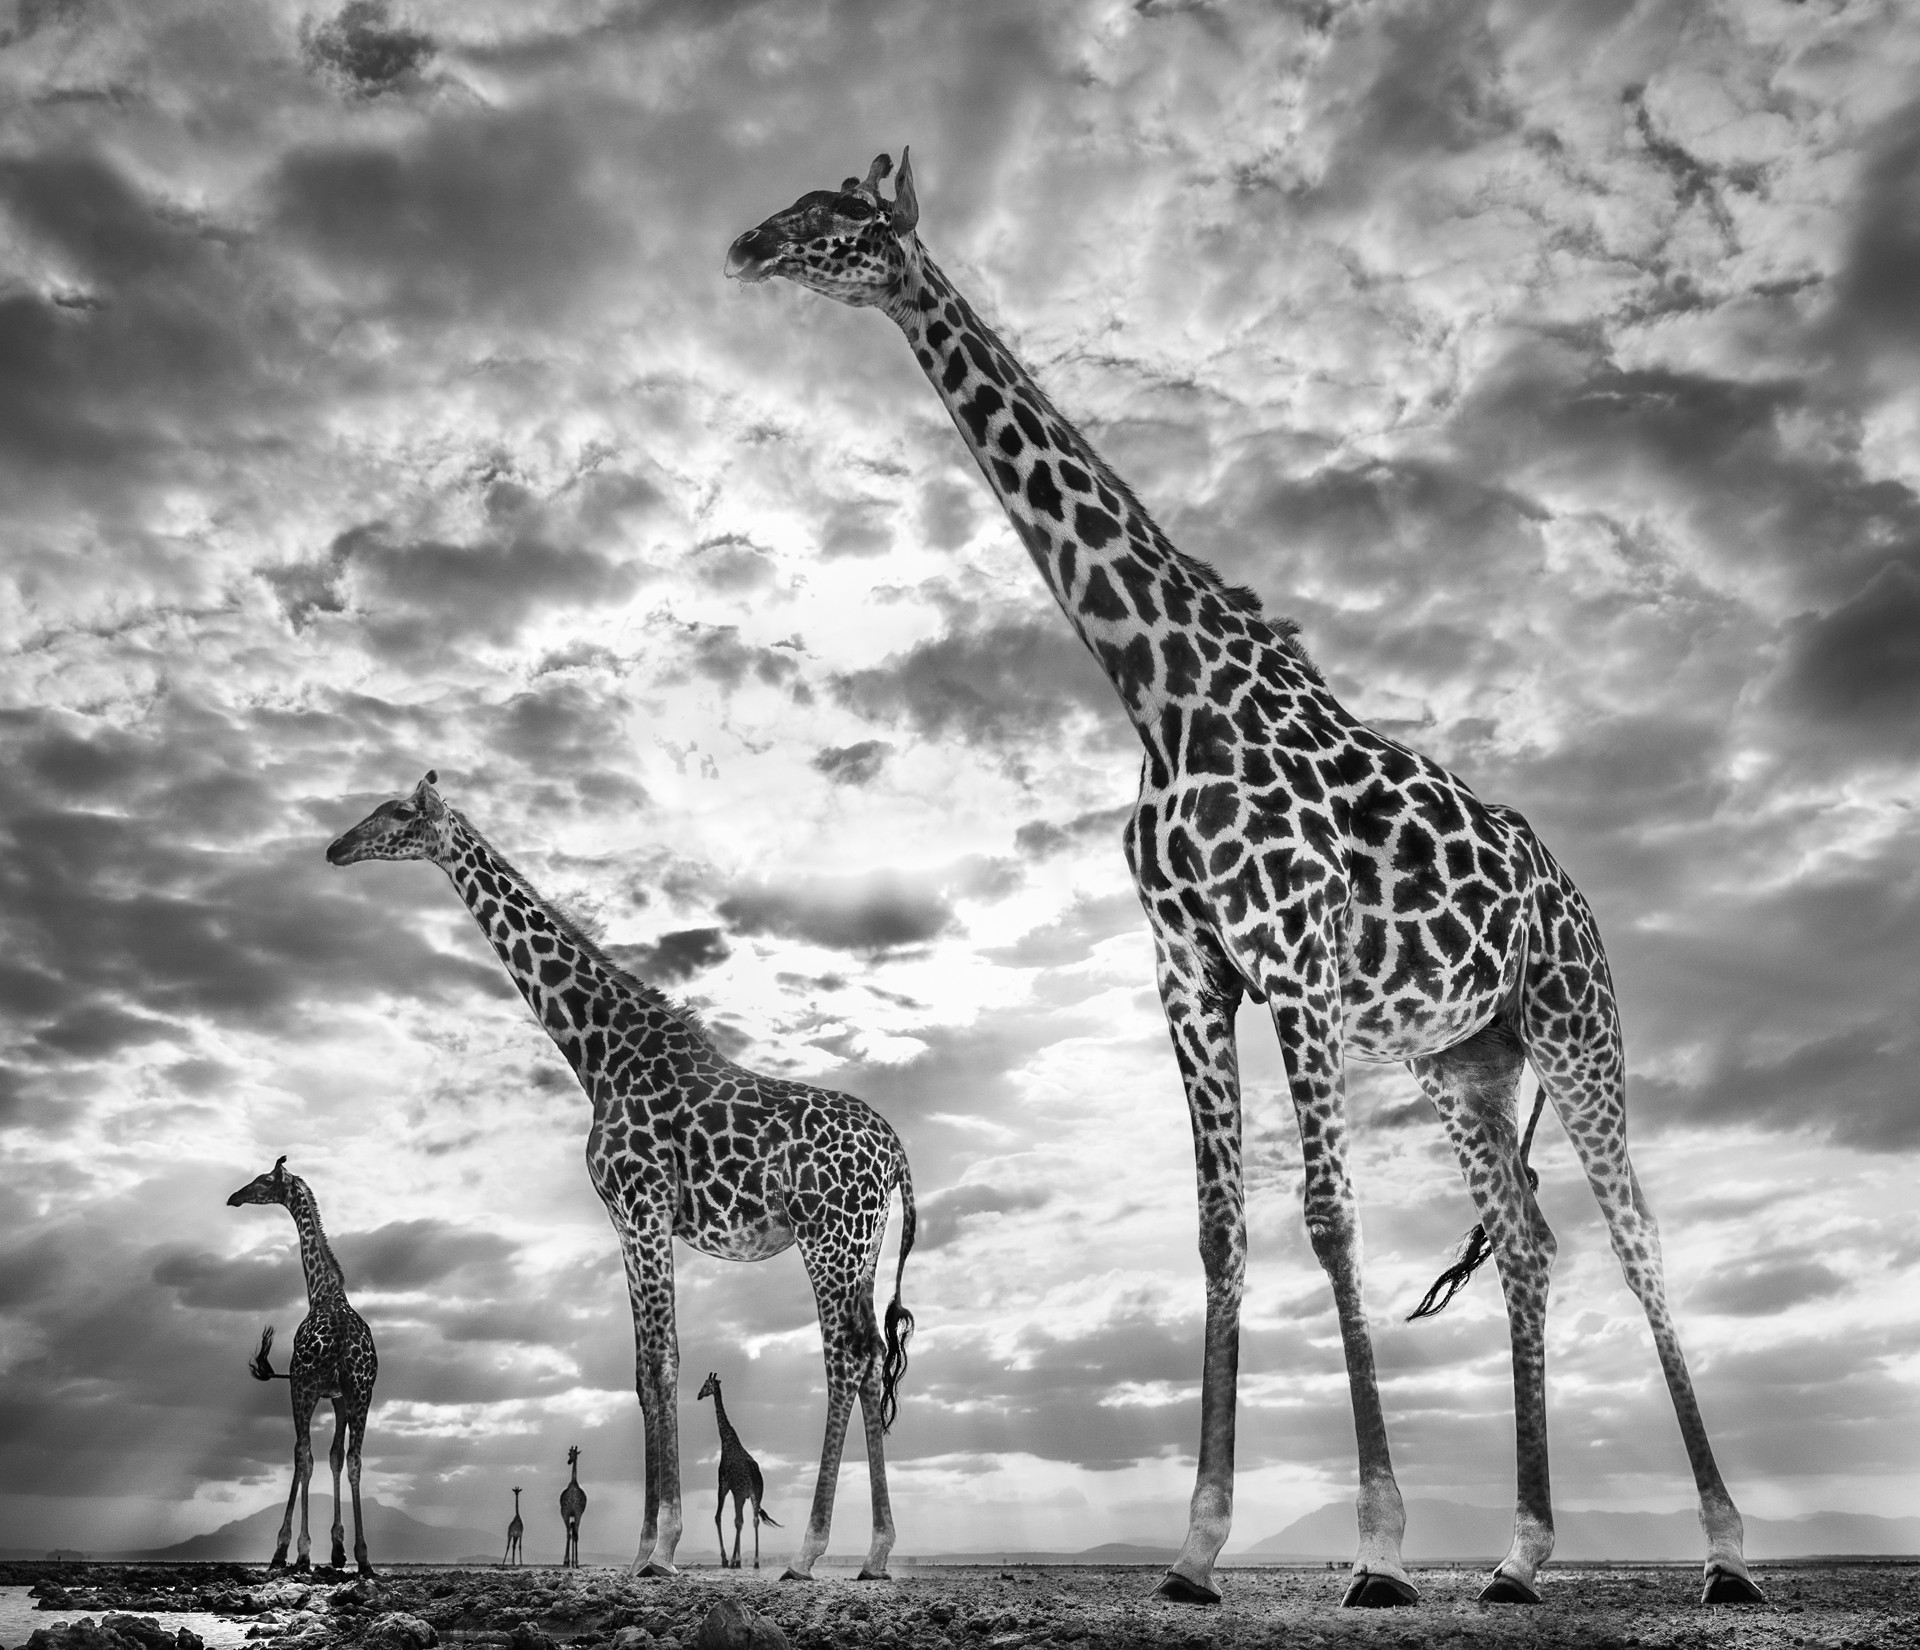 Keeping Up with the Crouches by David Yarrow